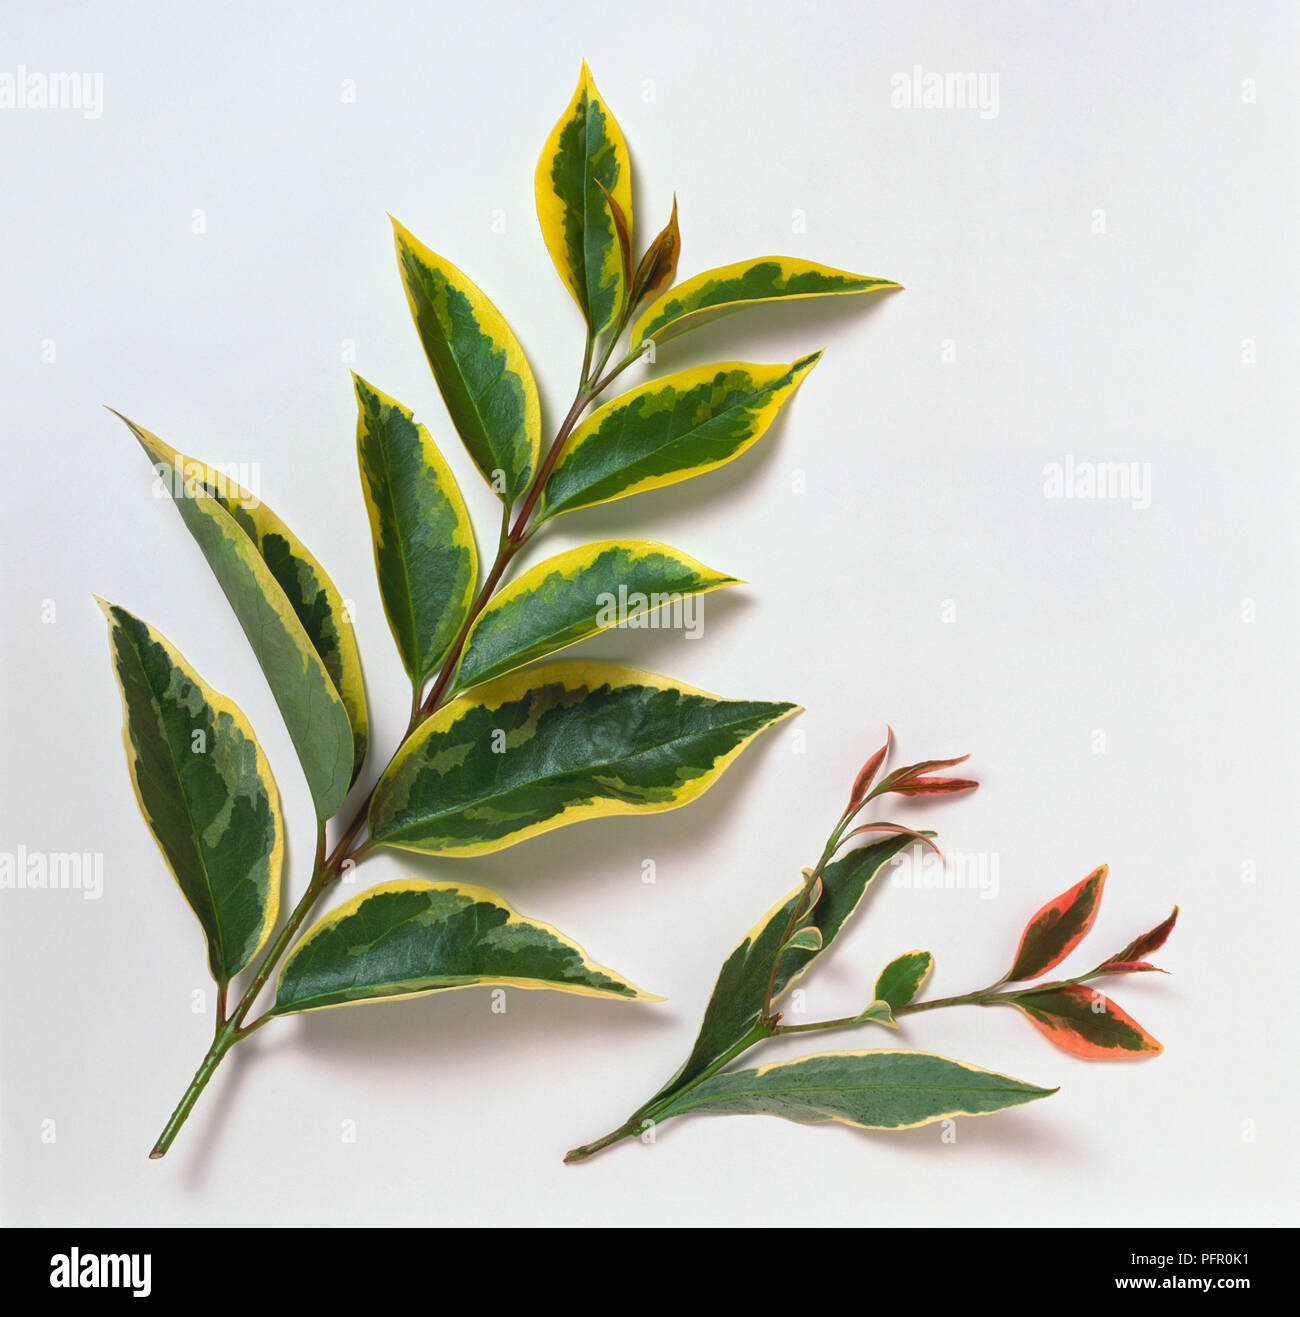 Glossy fresh stem of dark green rose leaves tinged with dark red lying on  scratched leather Stock Photo - Alamy